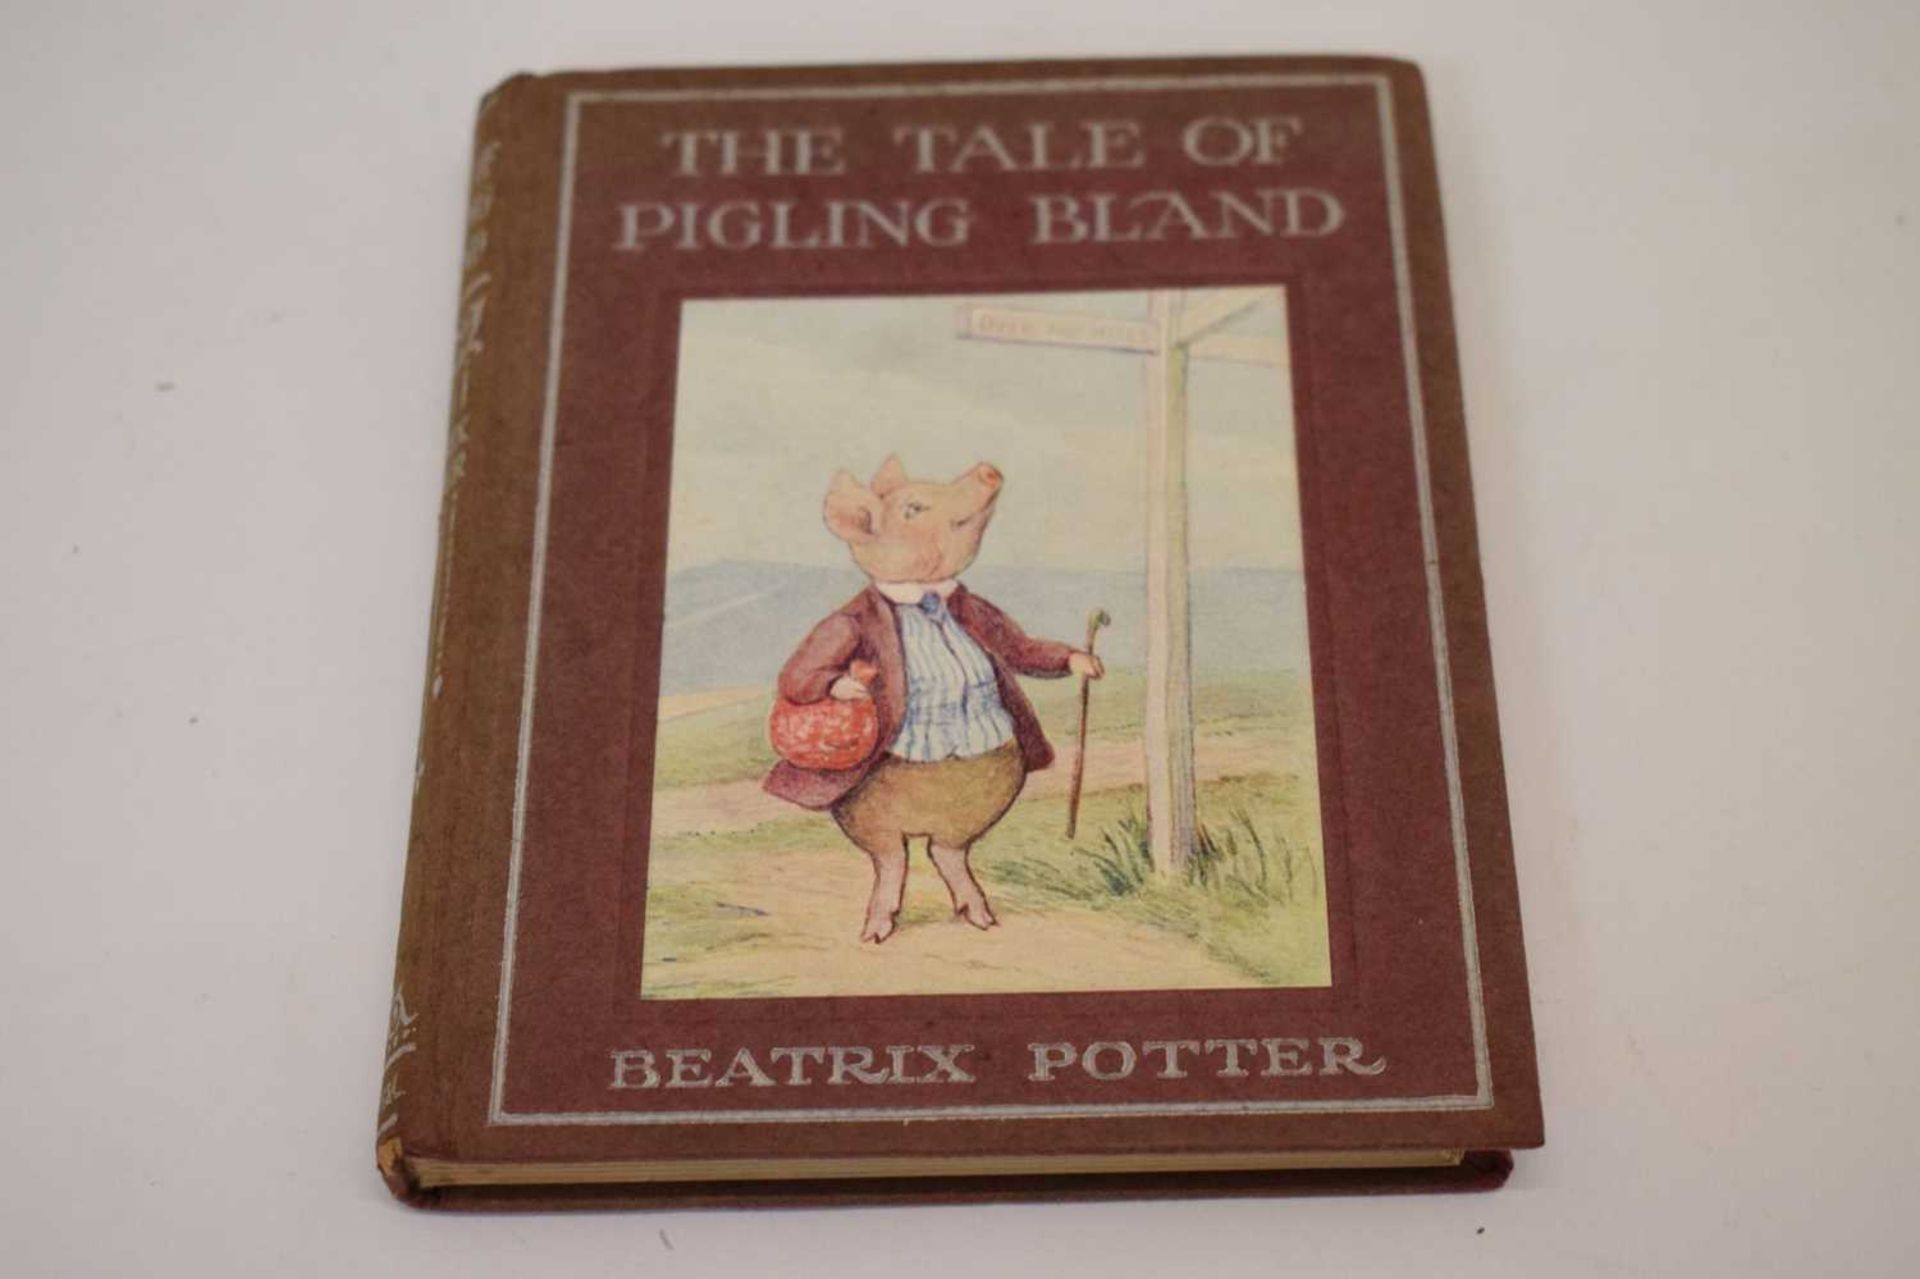 Potter, Beatrix - 'The Tale of Pigling Bland' - First edition 1913 - Image 2 of 19